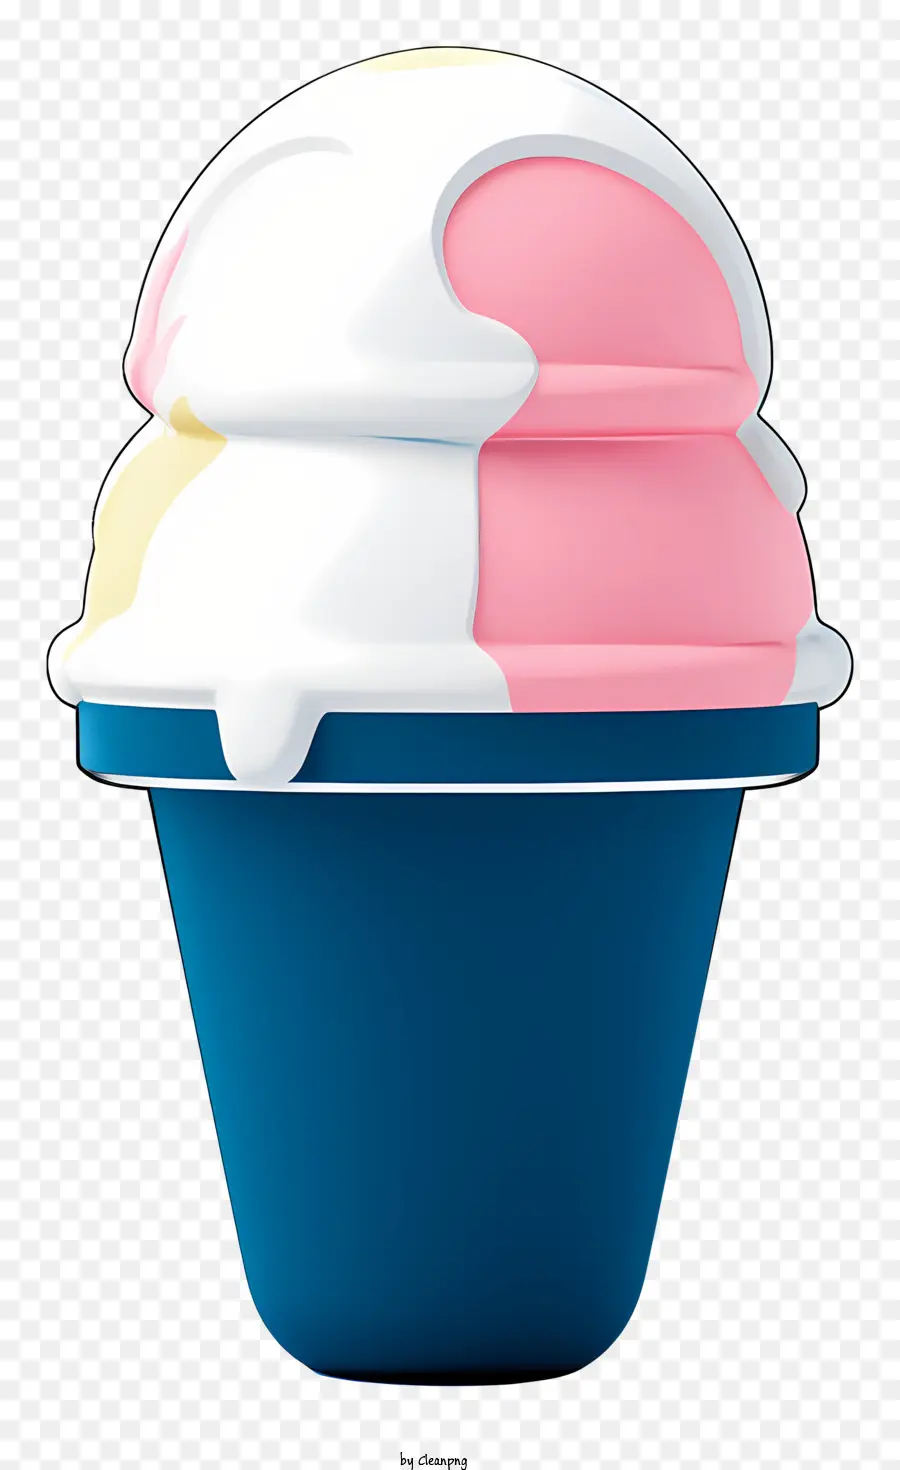 ice cream cone blue plastic white and pink swirl black background filled with ice cream